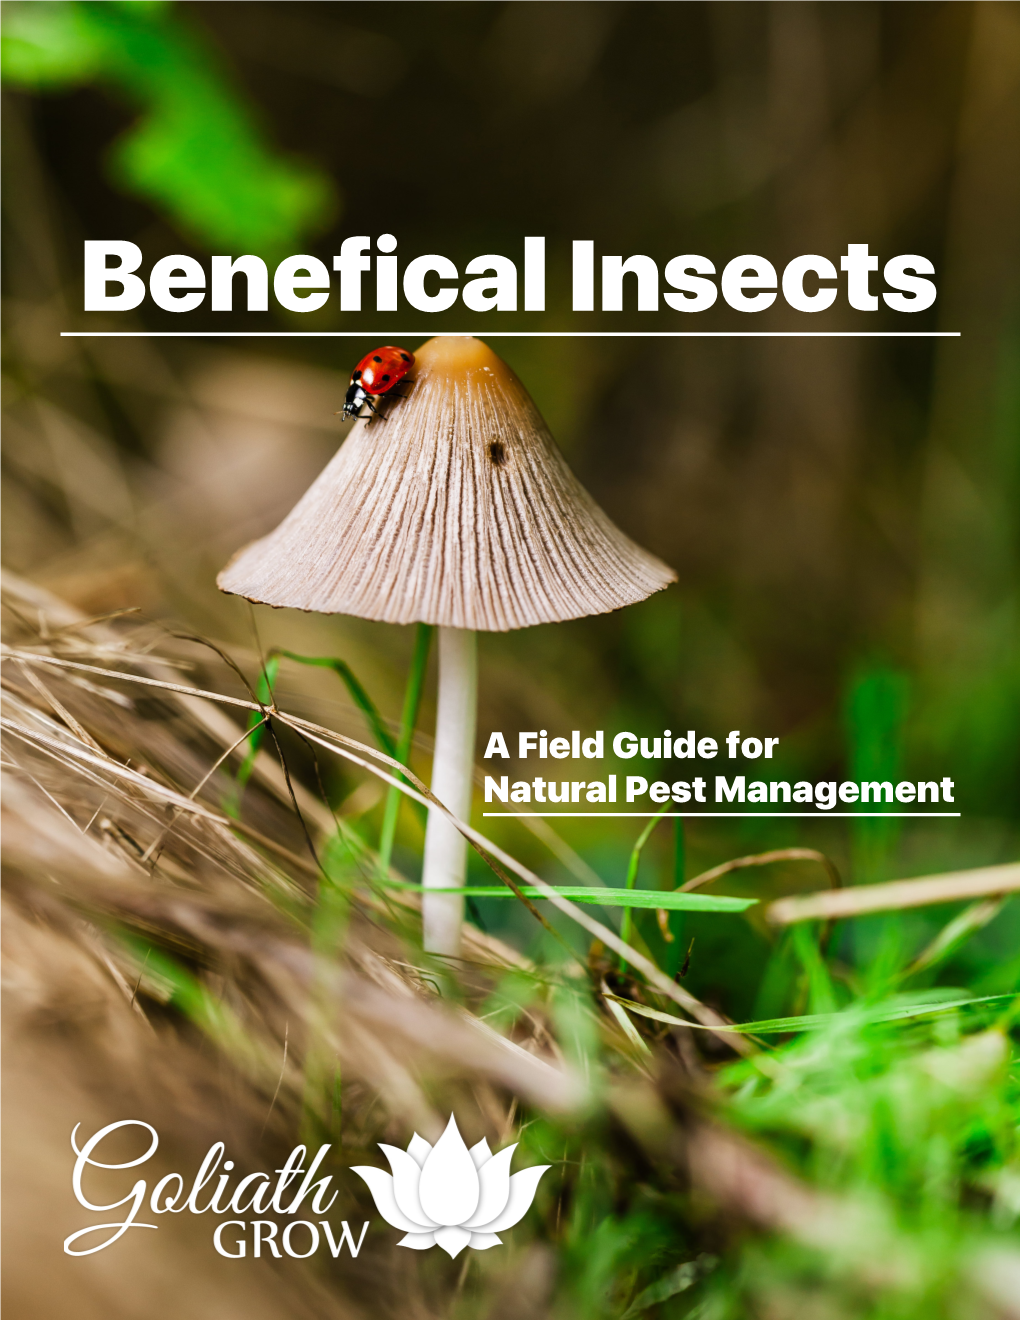 Benefical Insects